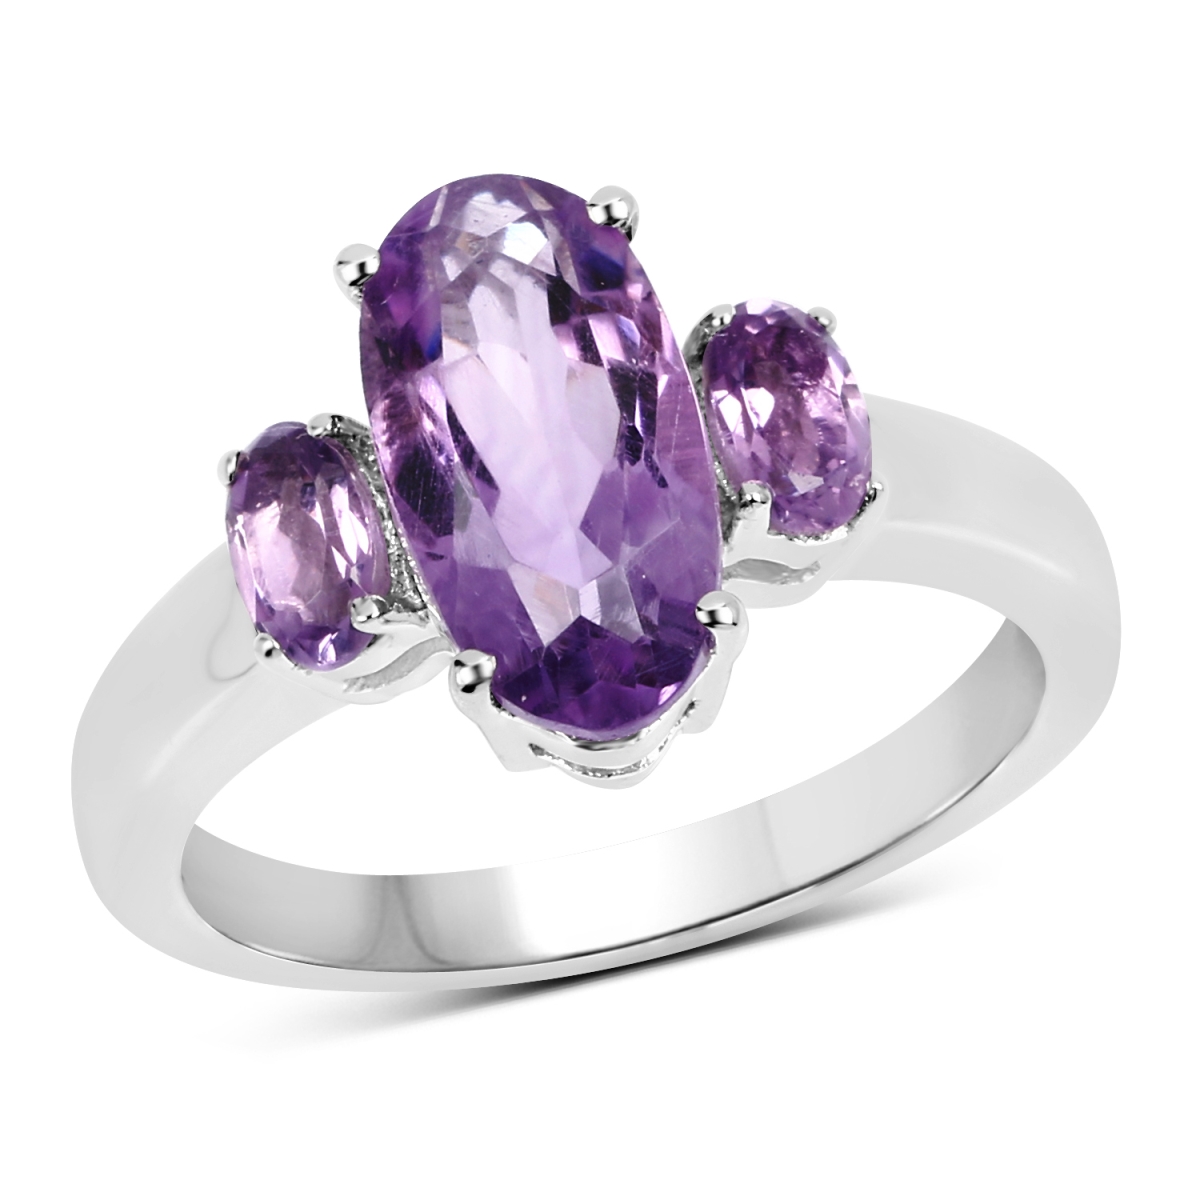 Picture of Malaika QR19158A-SSR-5 2.42 Carat Genuine Amethyst 0.925 Sterling Silver Ring